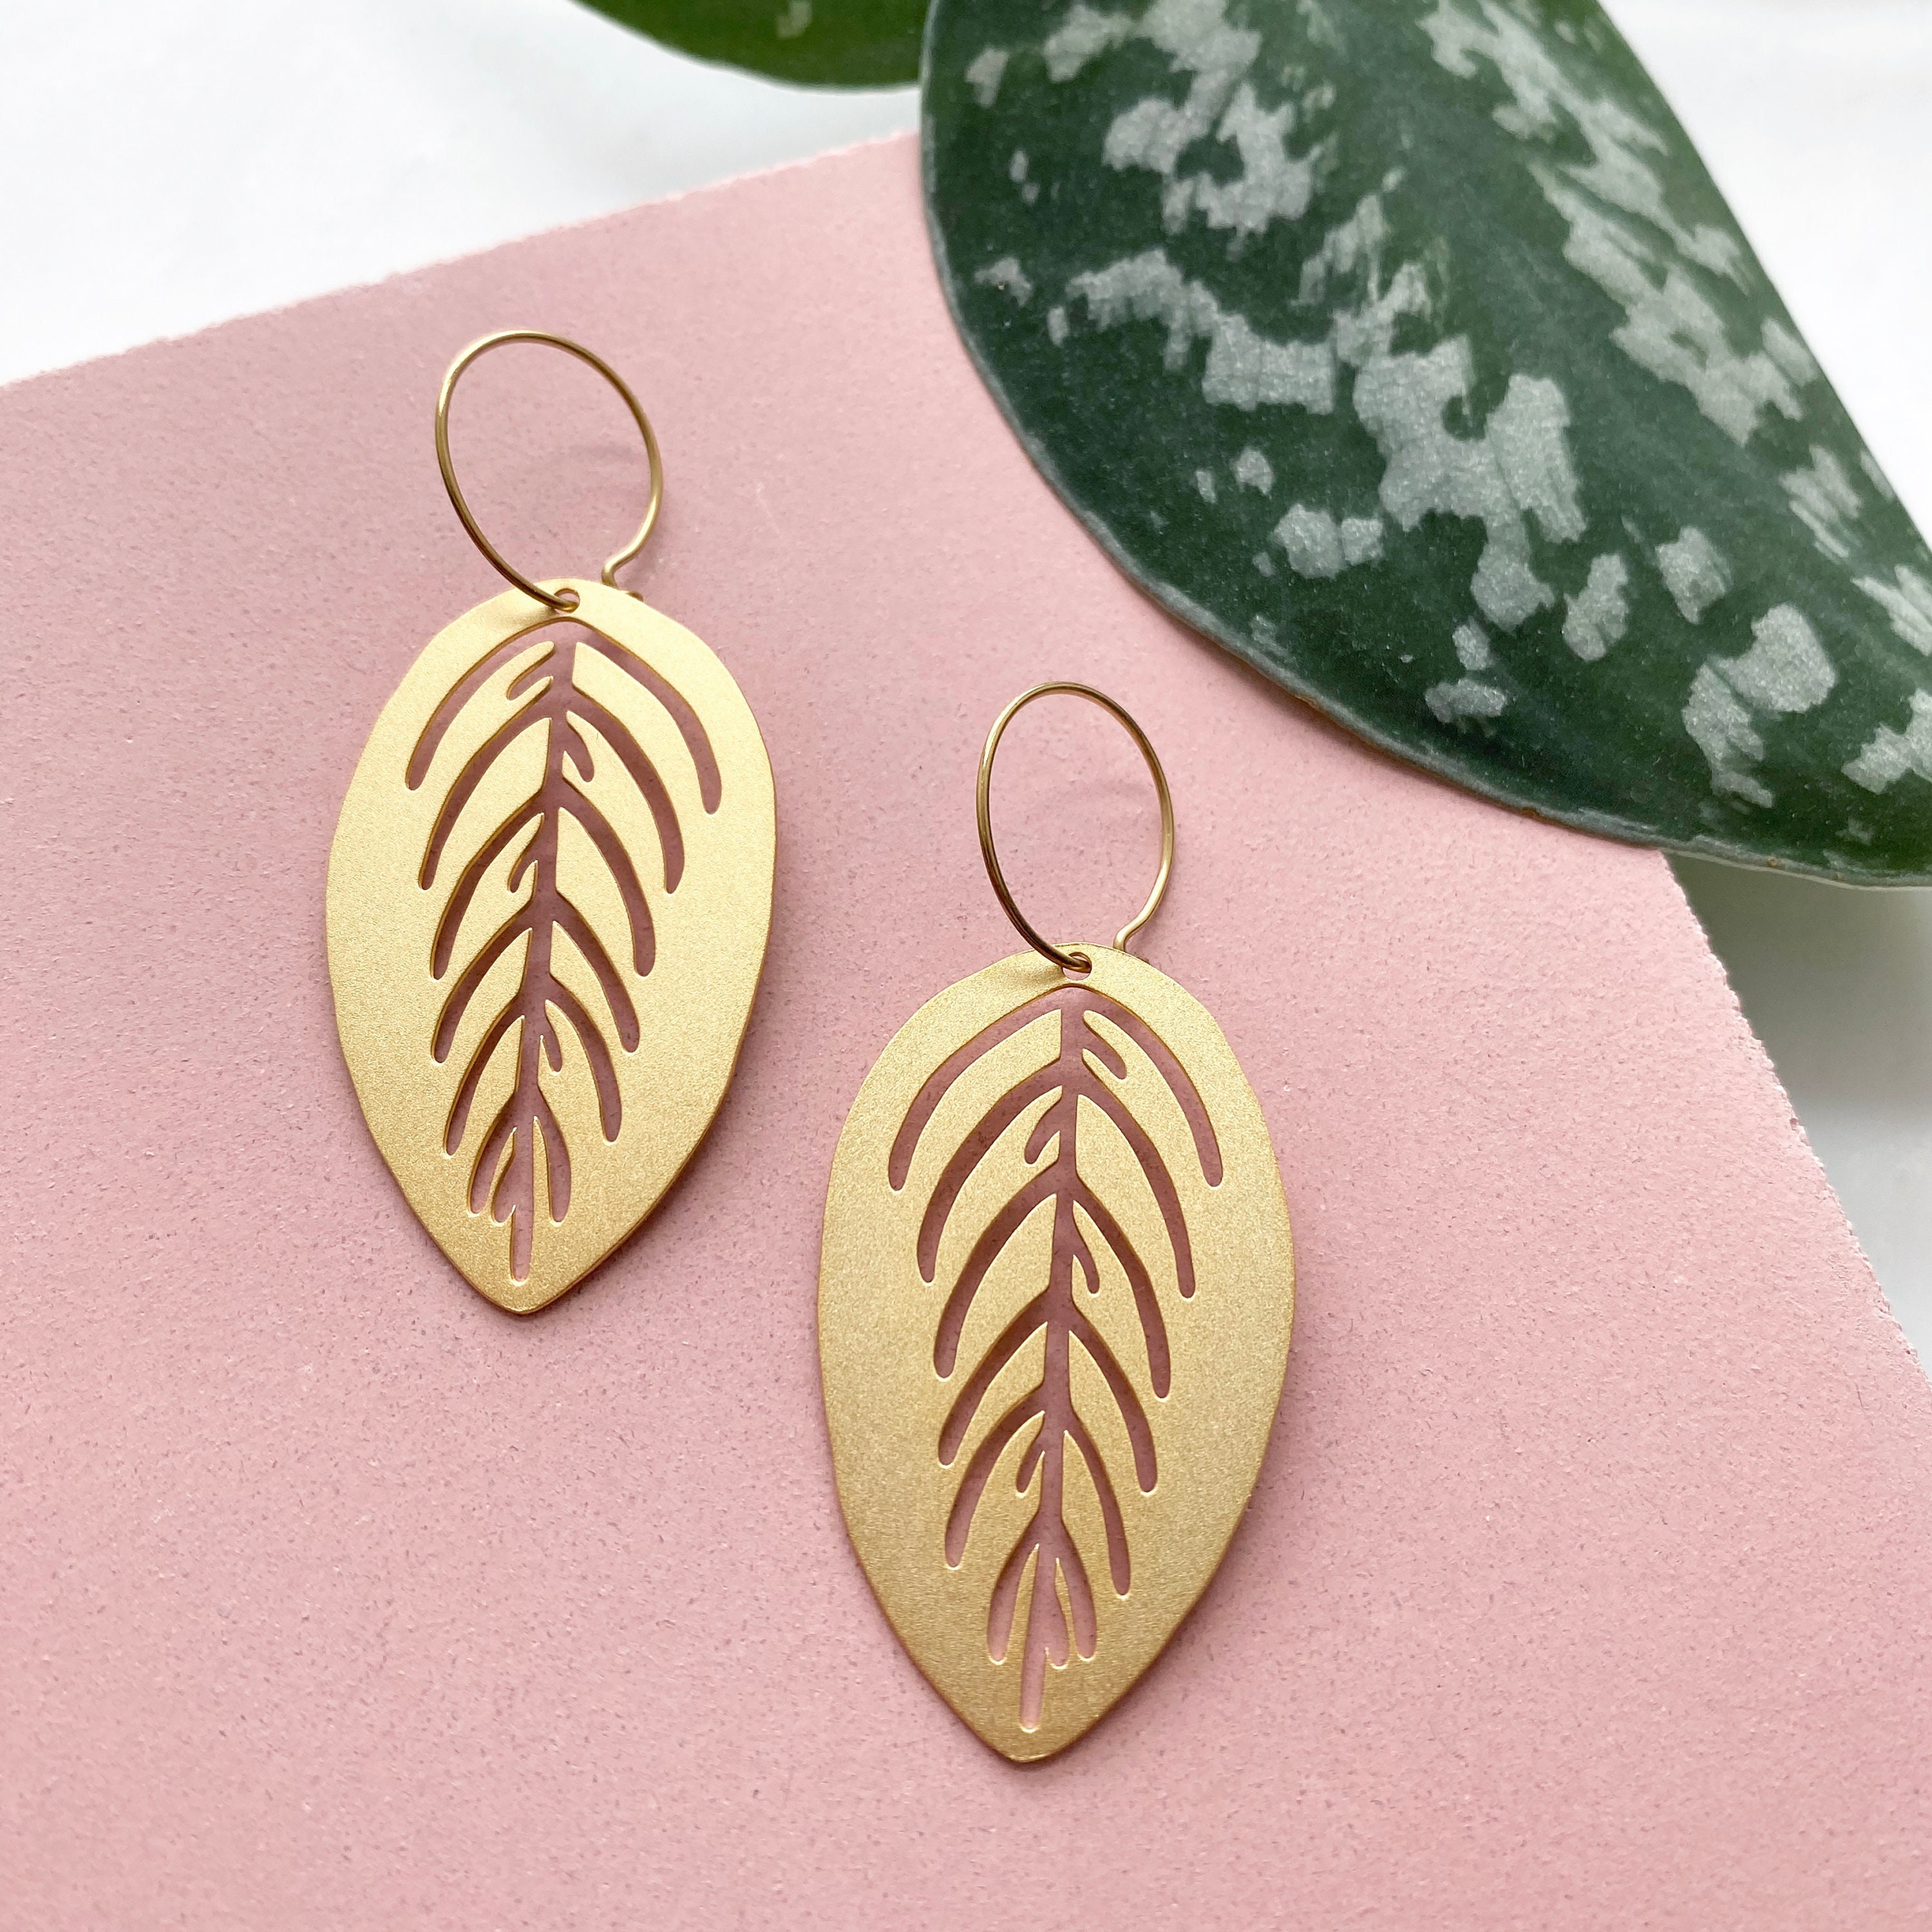 House Plant Hoop Earrings - Tropical Gold Leaf Delicate Dangle Statement